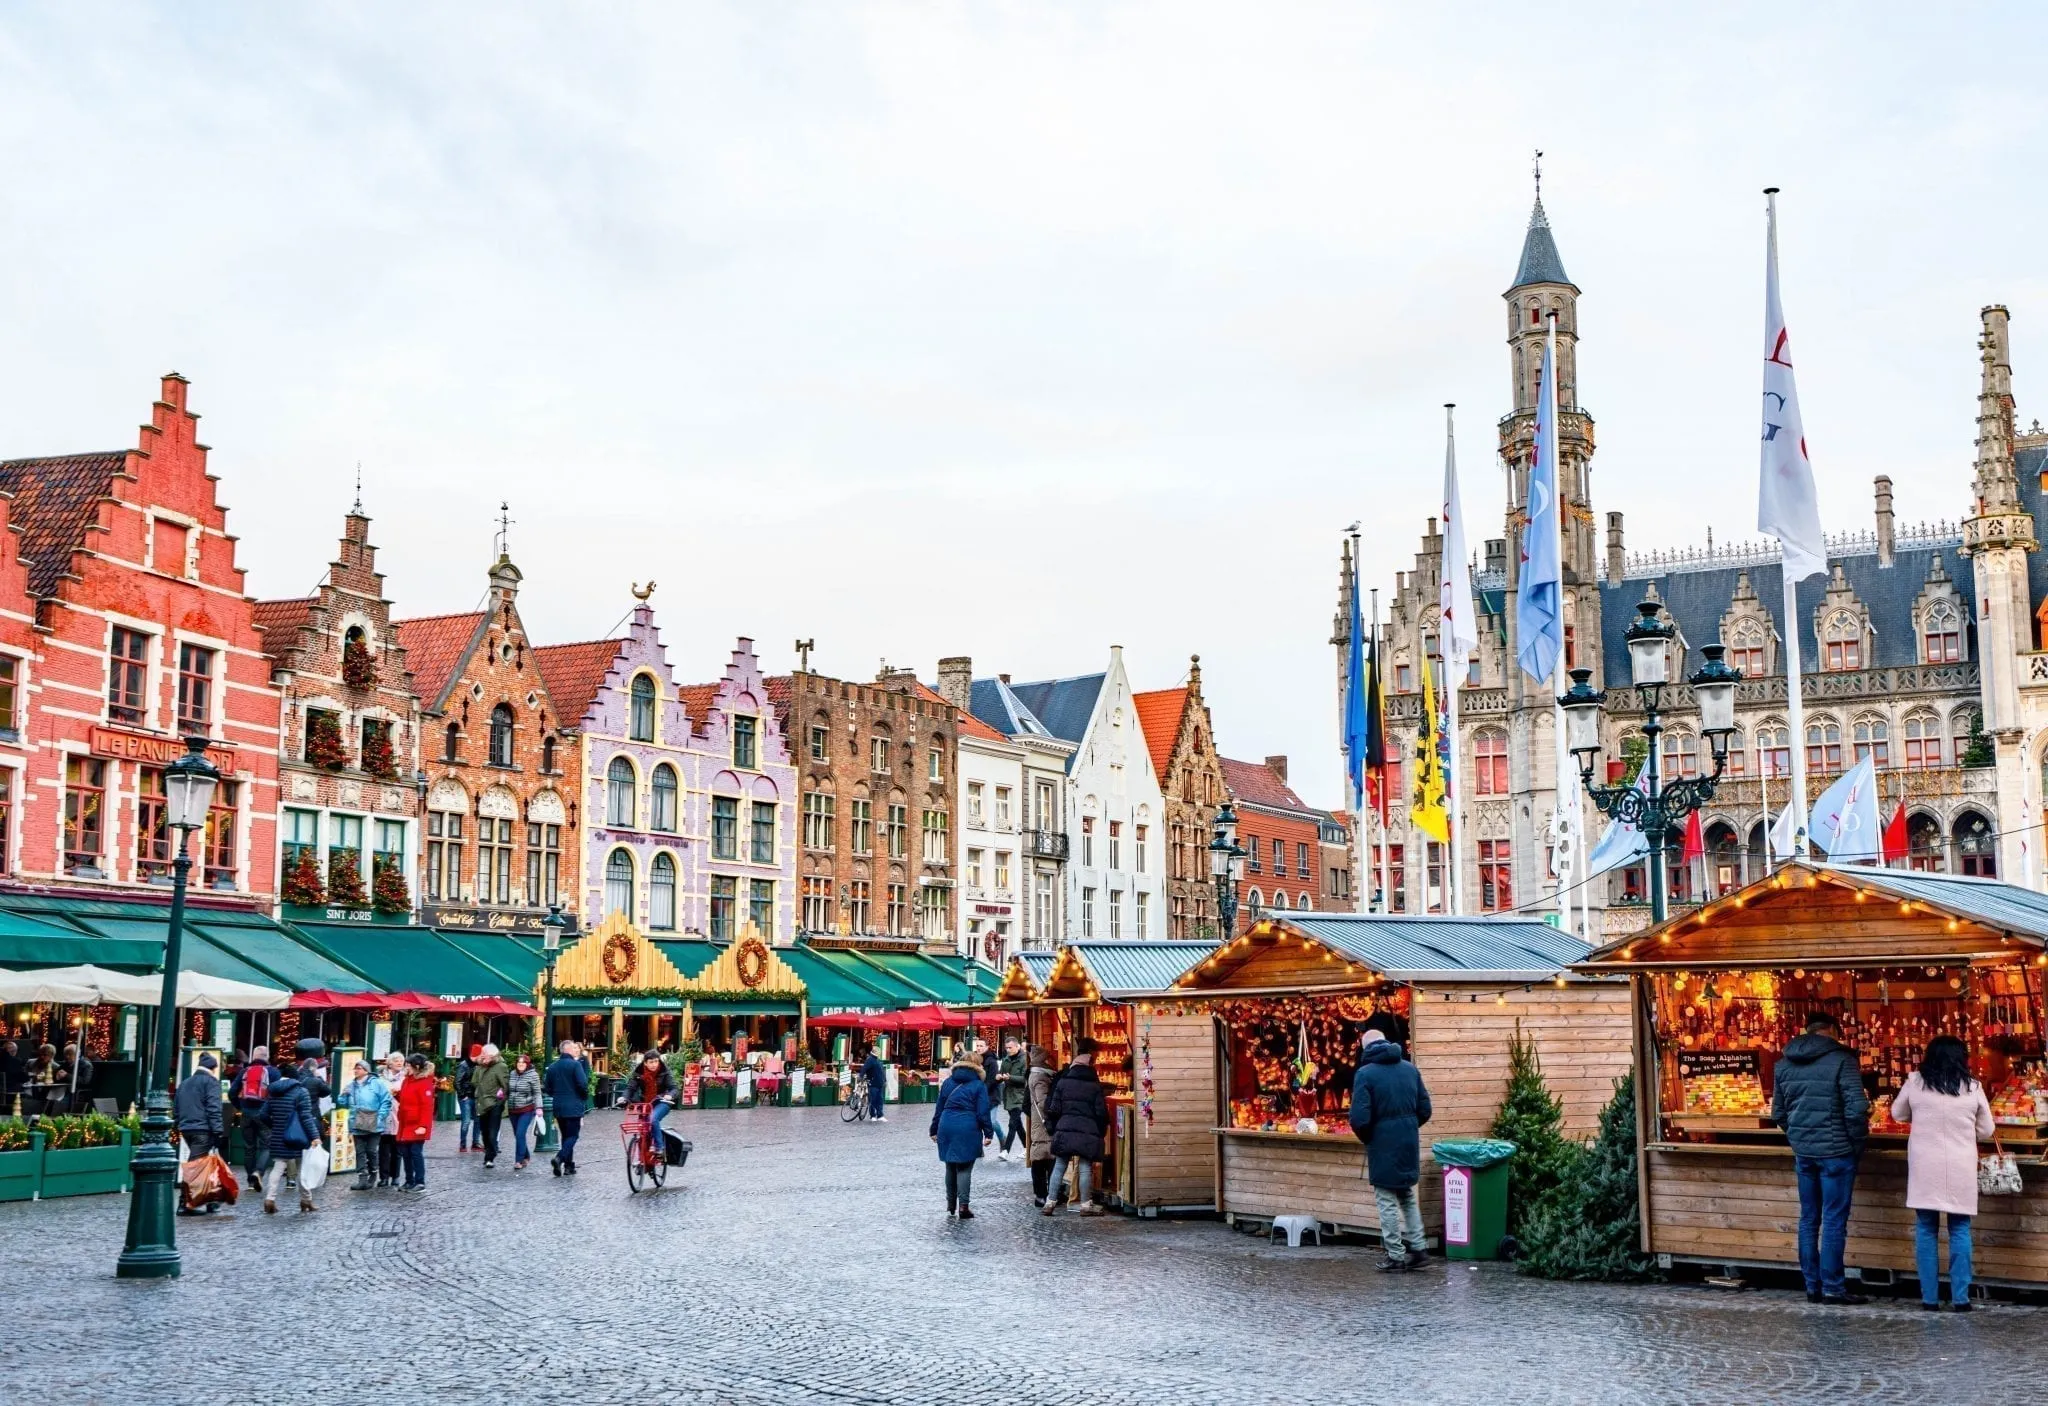 grote markt square with bruges christmas market as seen in bruges winter